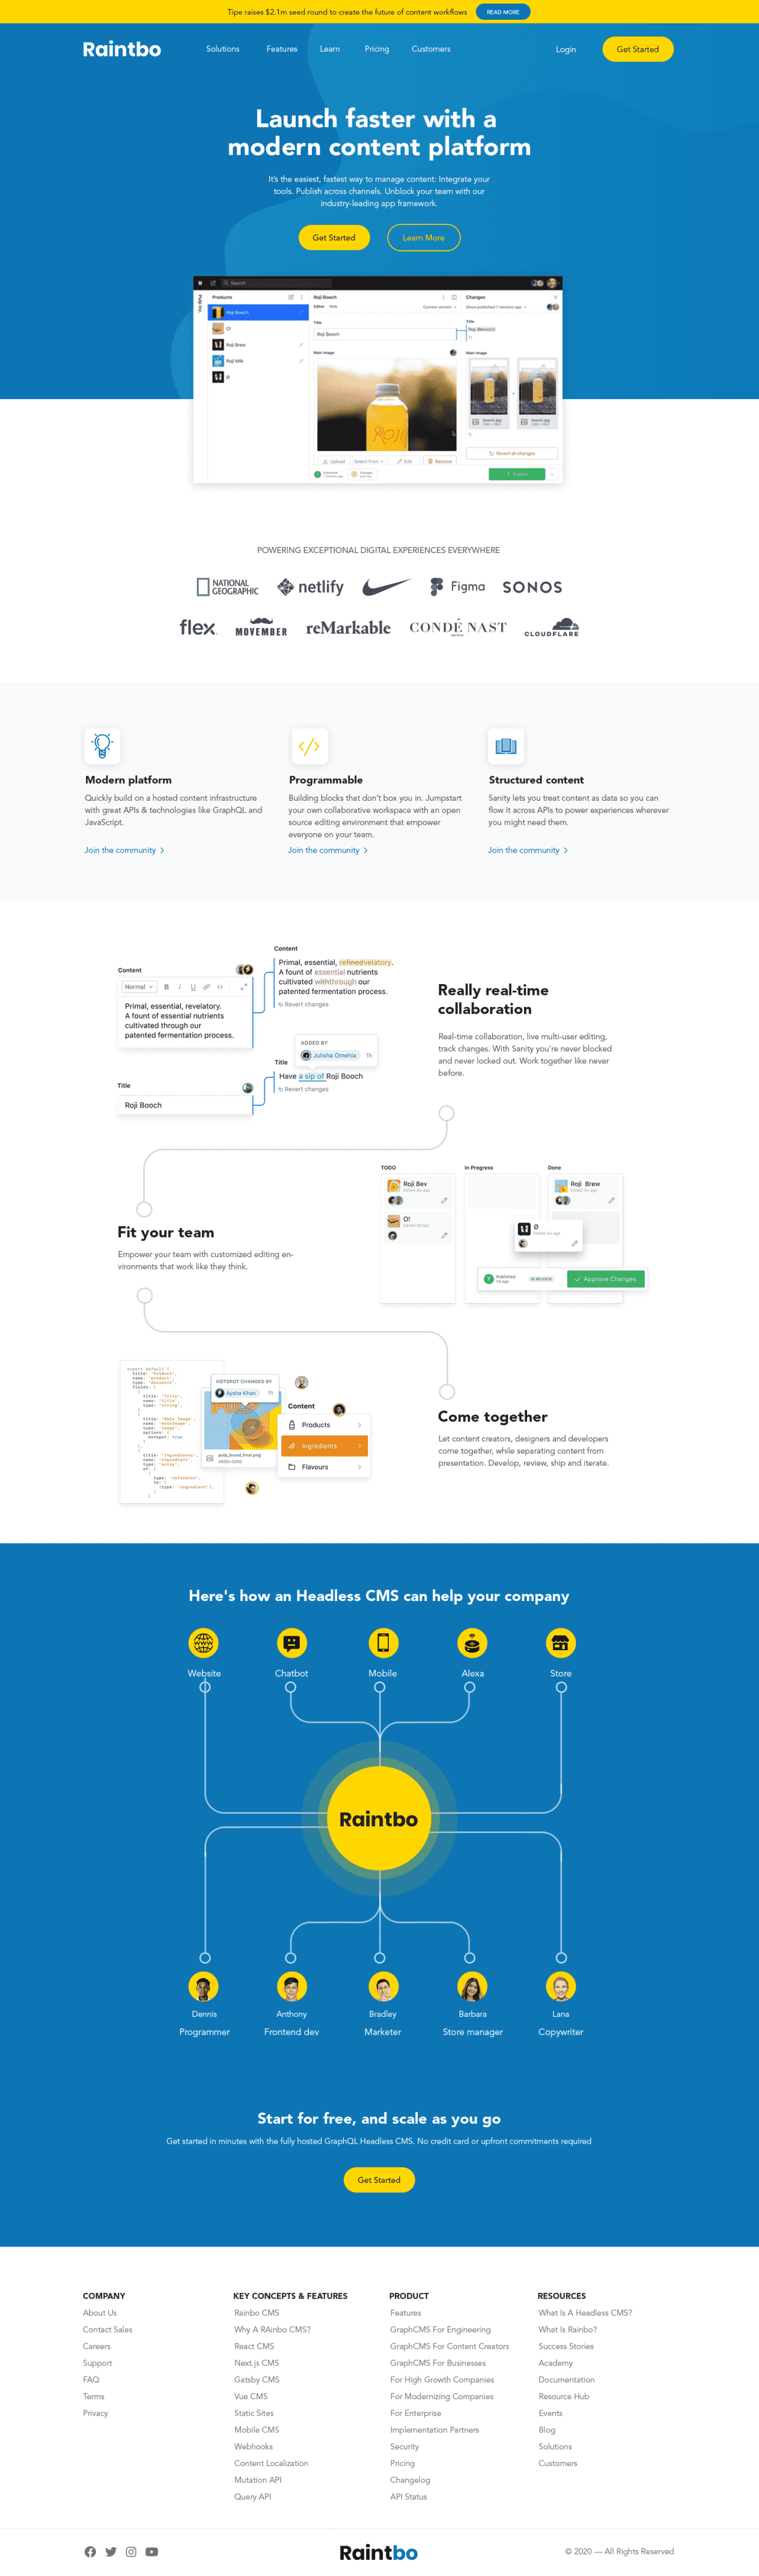 Figma UIUX Design for Web and Mobile